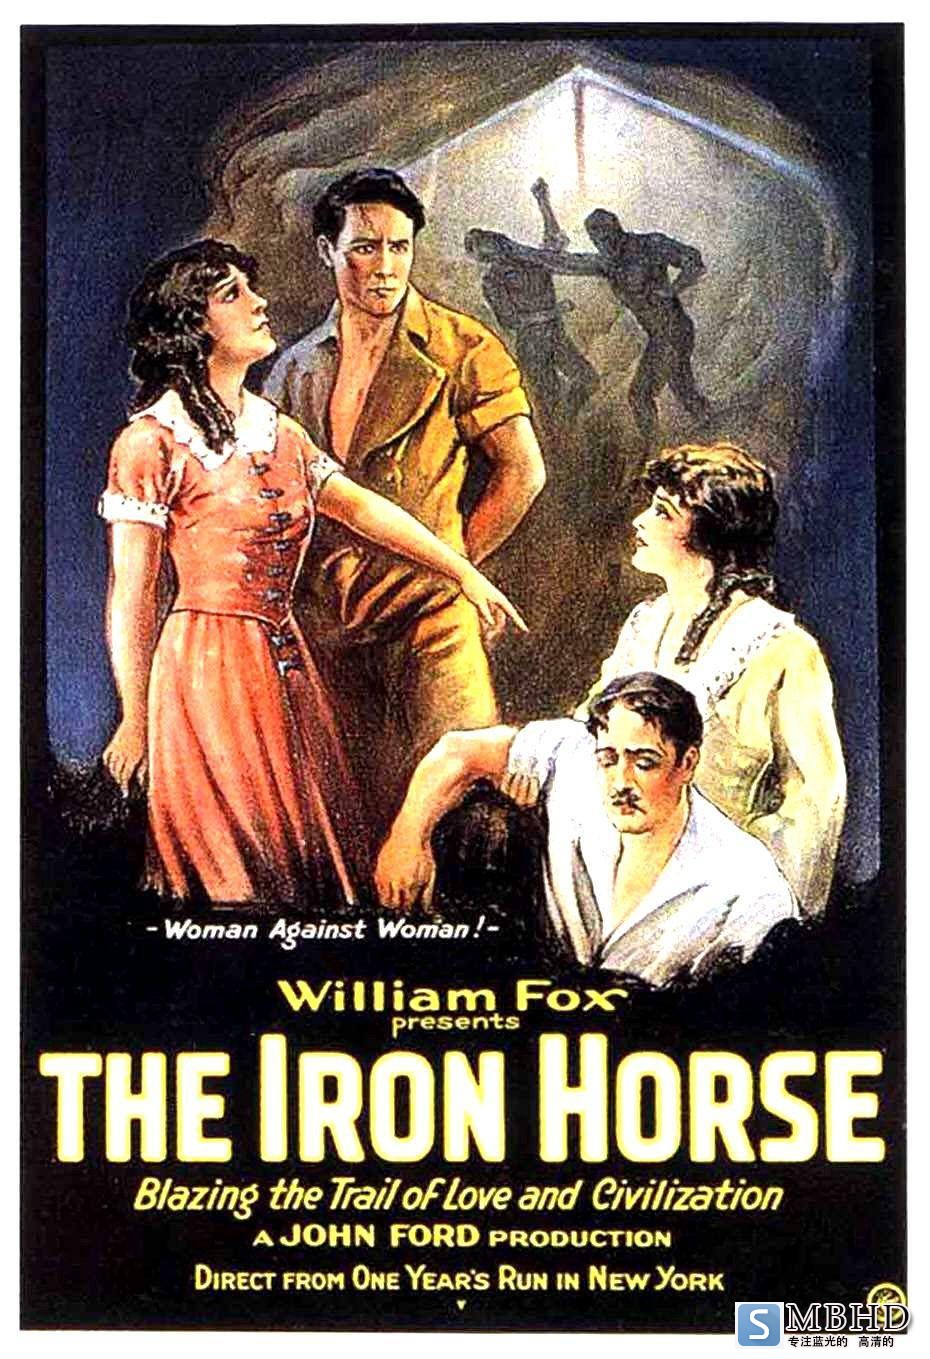  The.Iron.Horse.1924.720p.BluRay.x264-CiNEFiLE 6.55GB-1.png